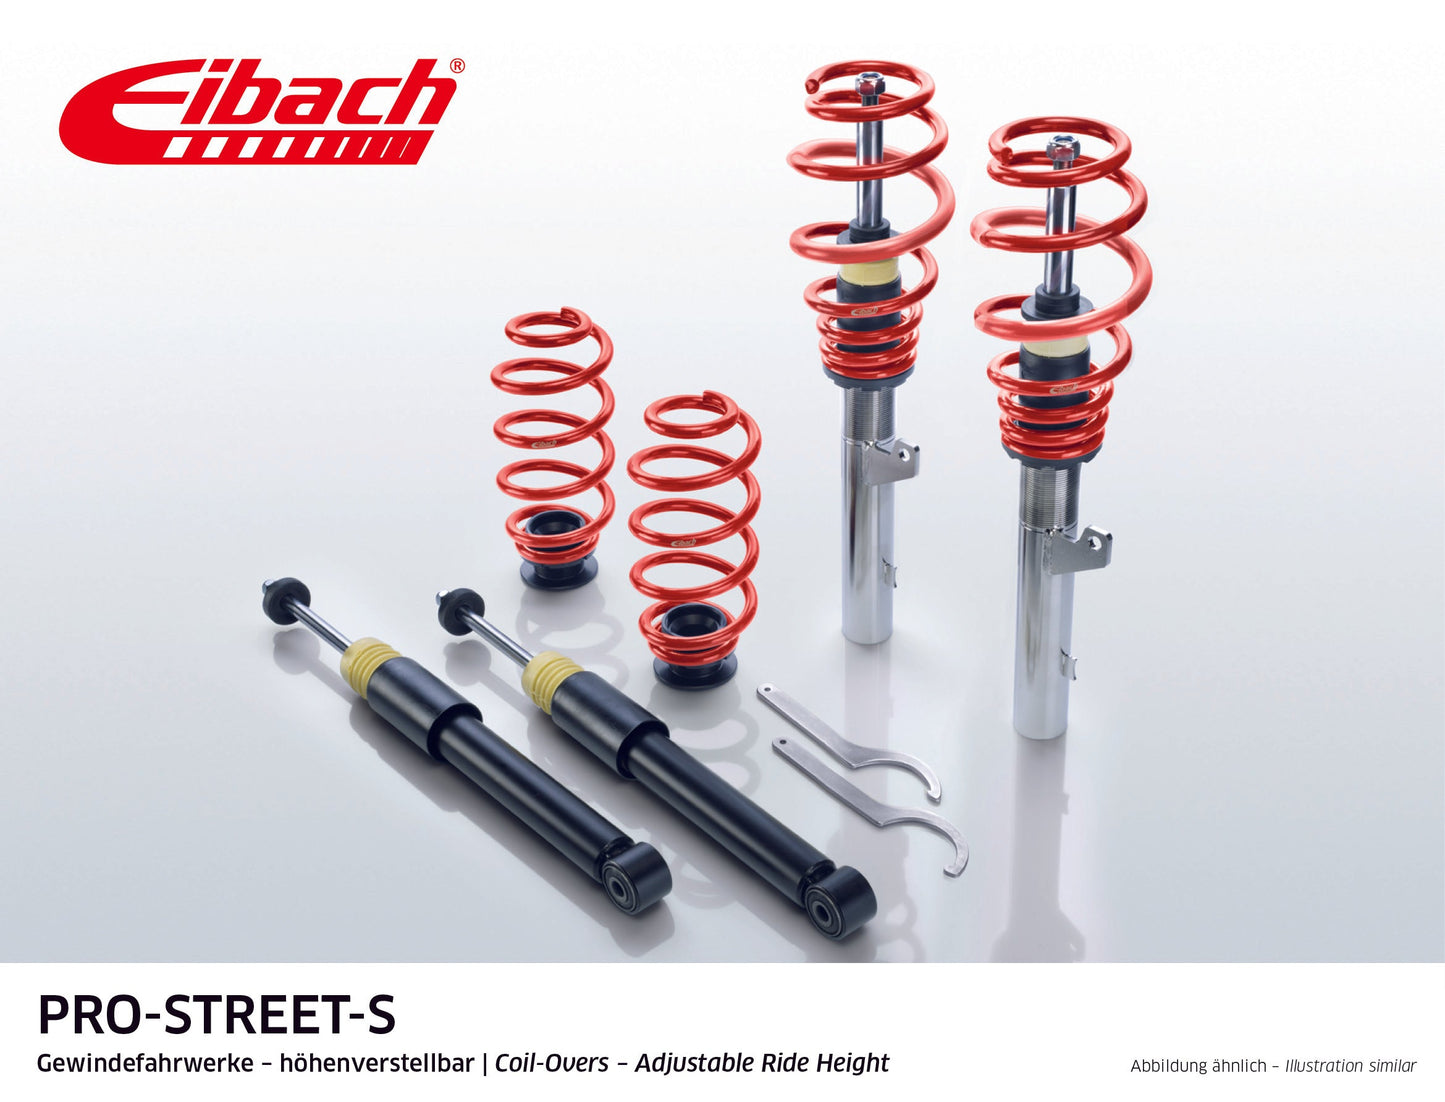 Eibach Pro-Street Coilover (PSS65-25-043-04-22) at £1567.76